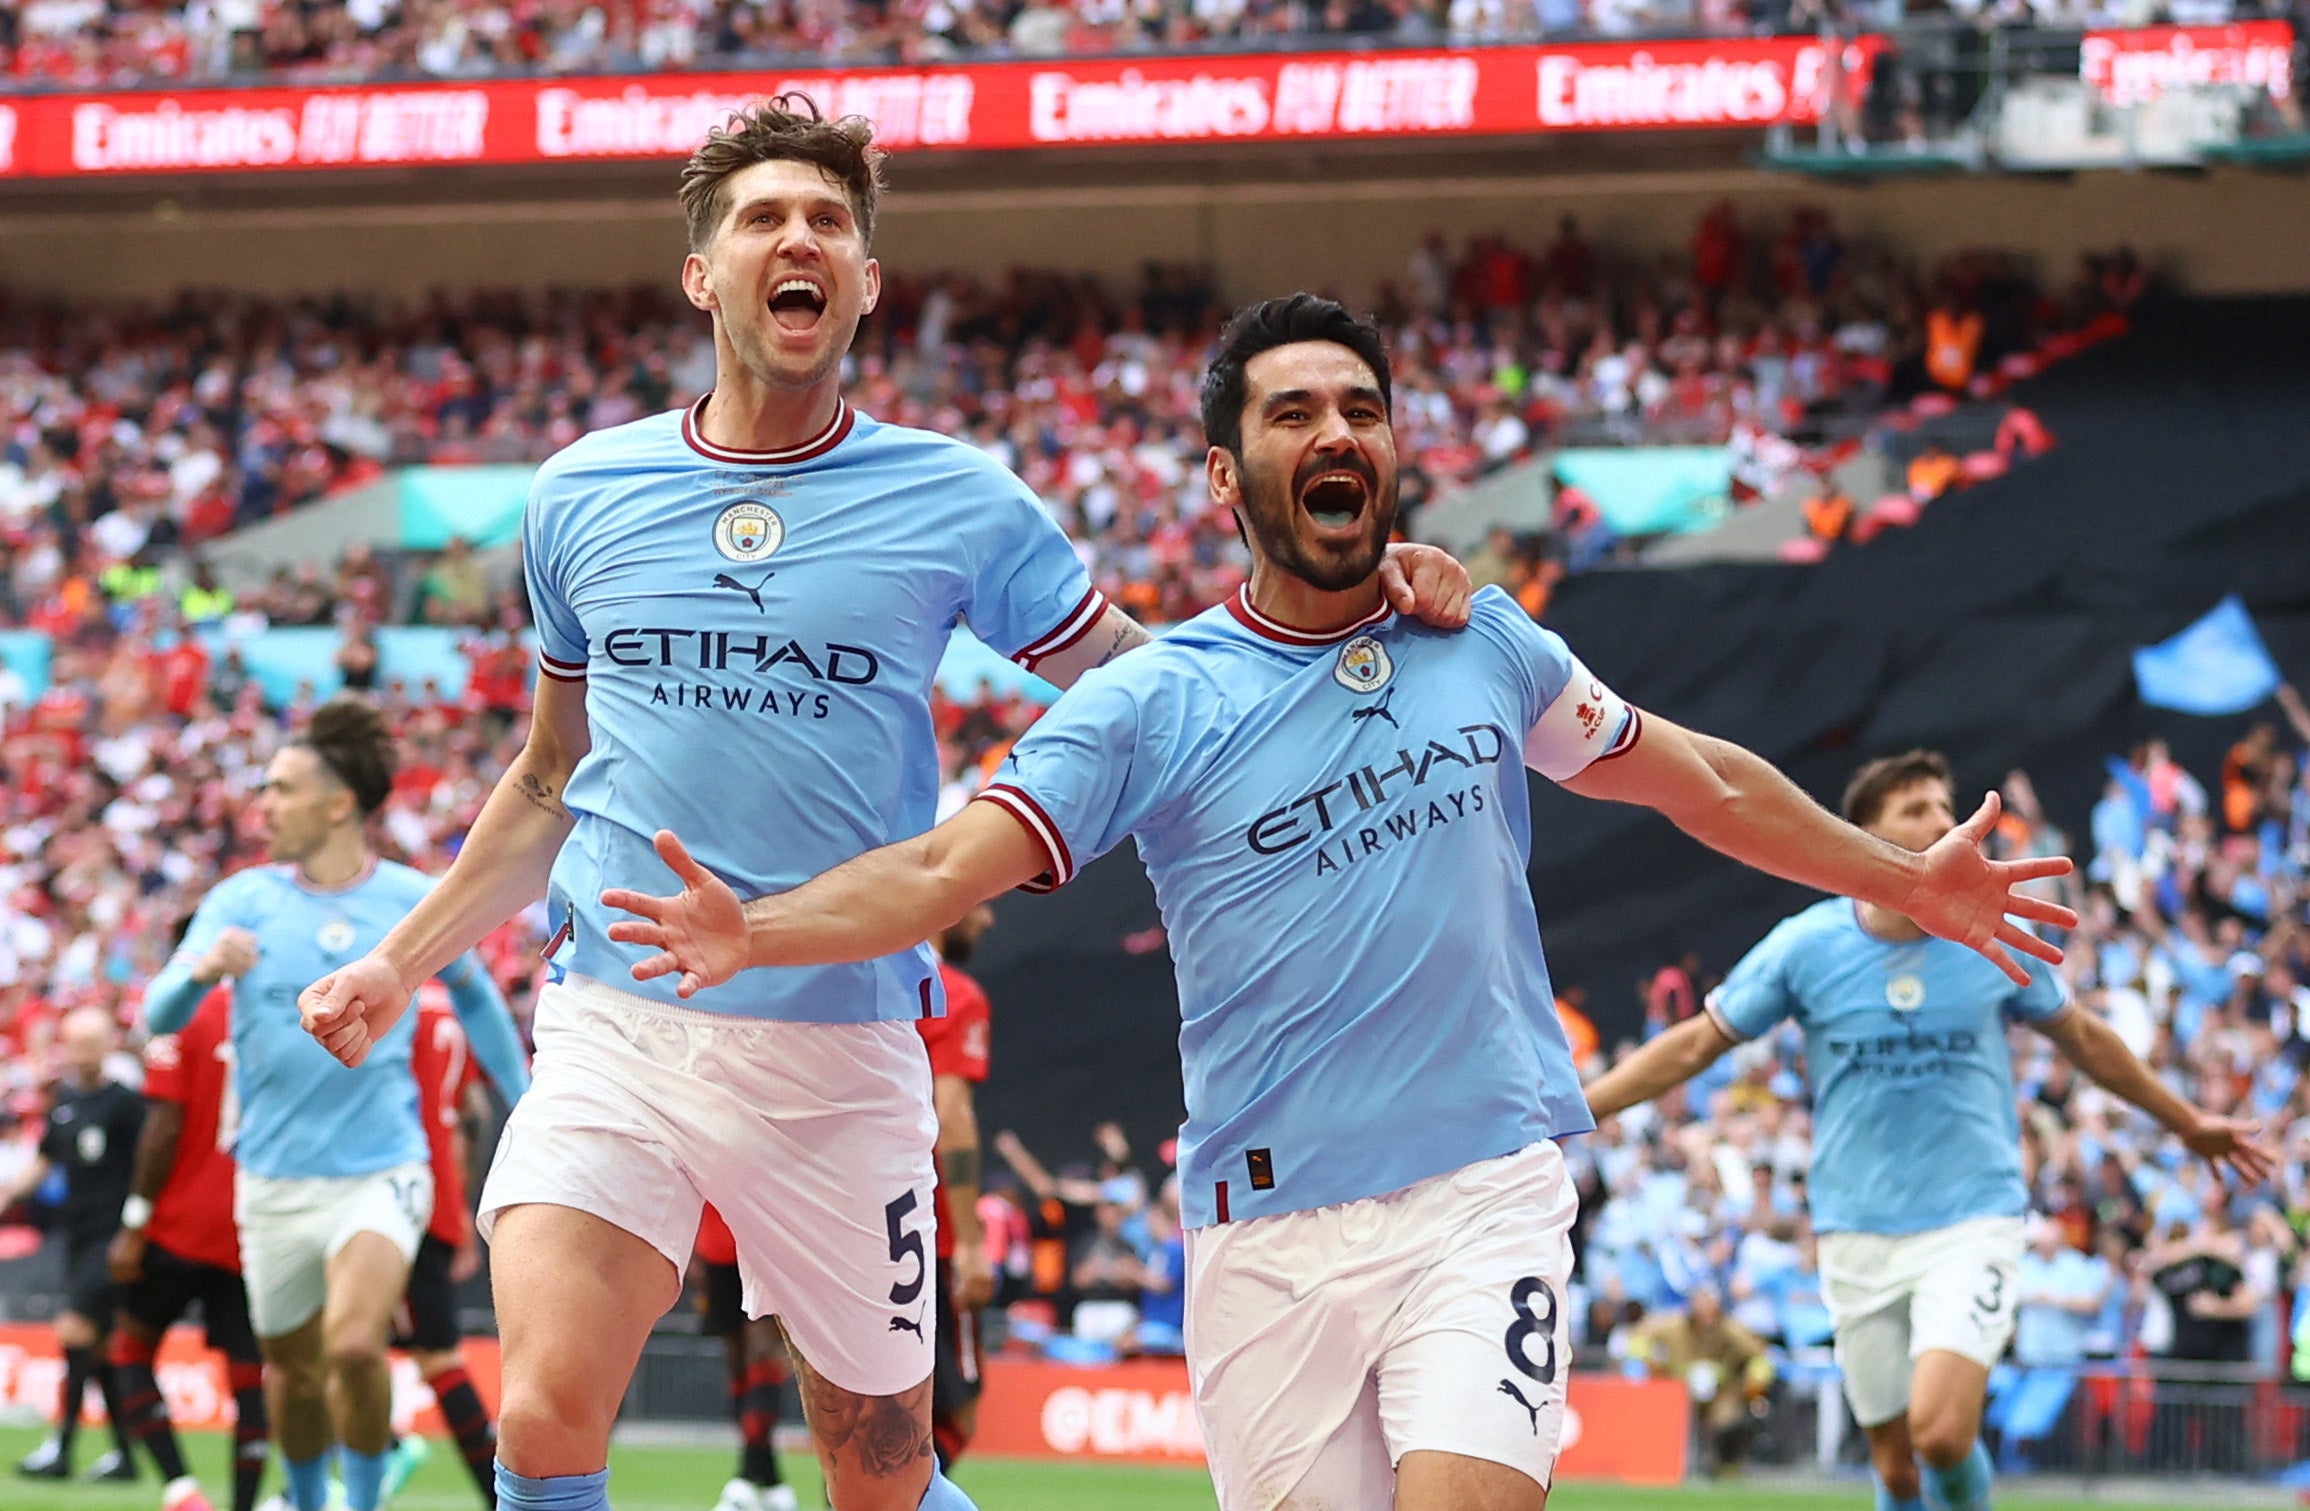 Stones and Gundogan were excellent for City